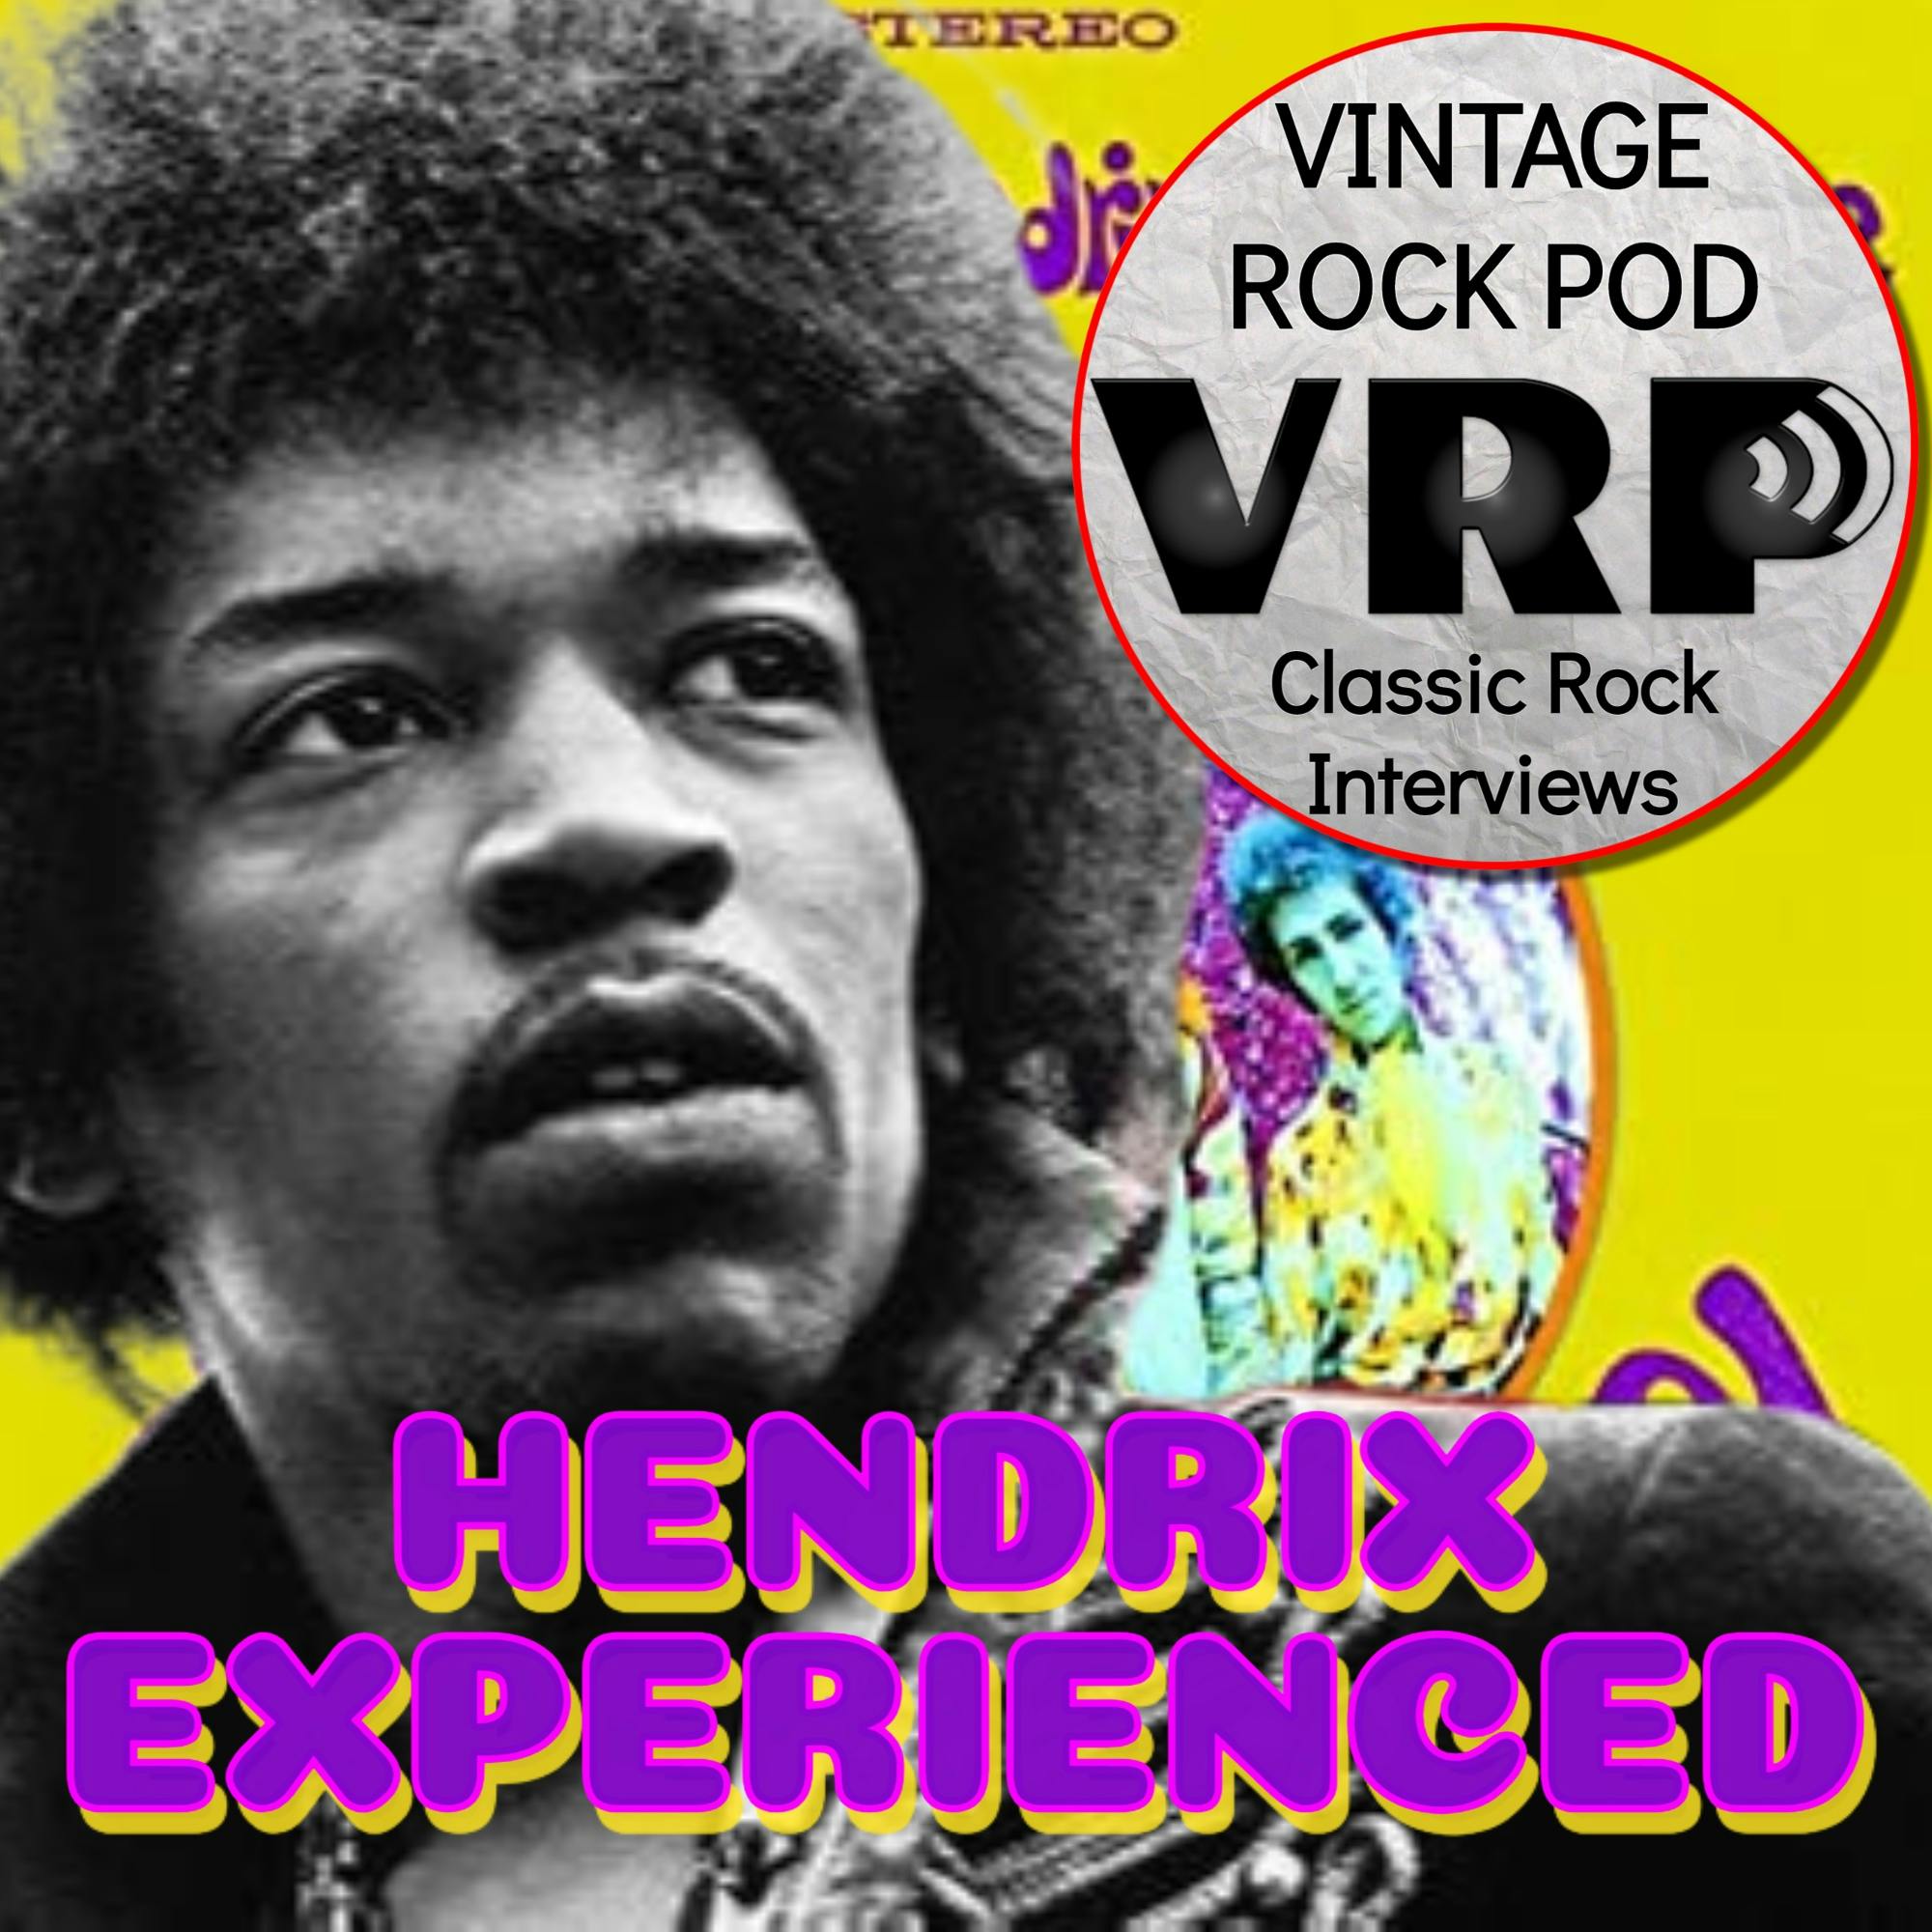 Hendrix Experienced - Rock Stars Tell Their Stories About Jimi